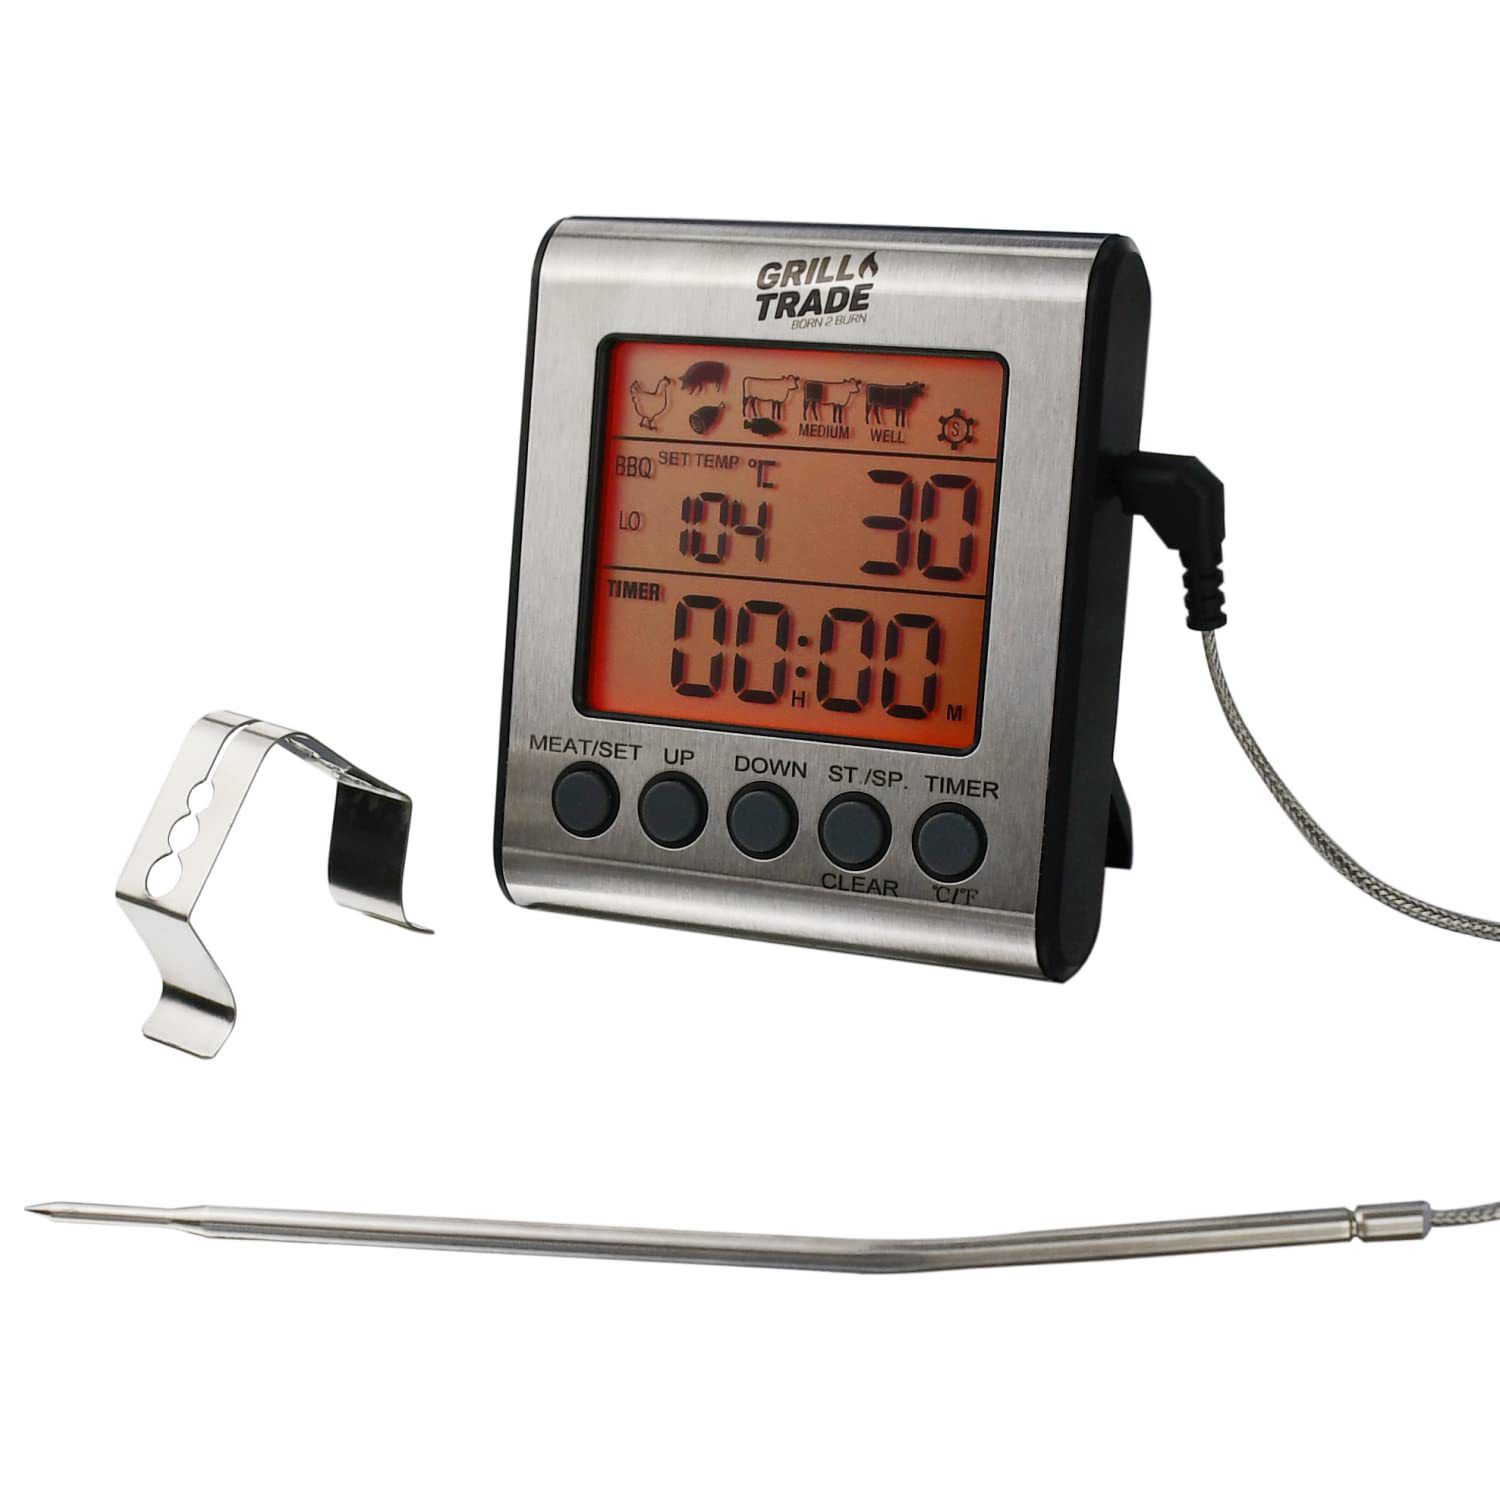 Buy Acurite Digital Meat Thermometer with Probe for Oven/ Grill / Barbecue